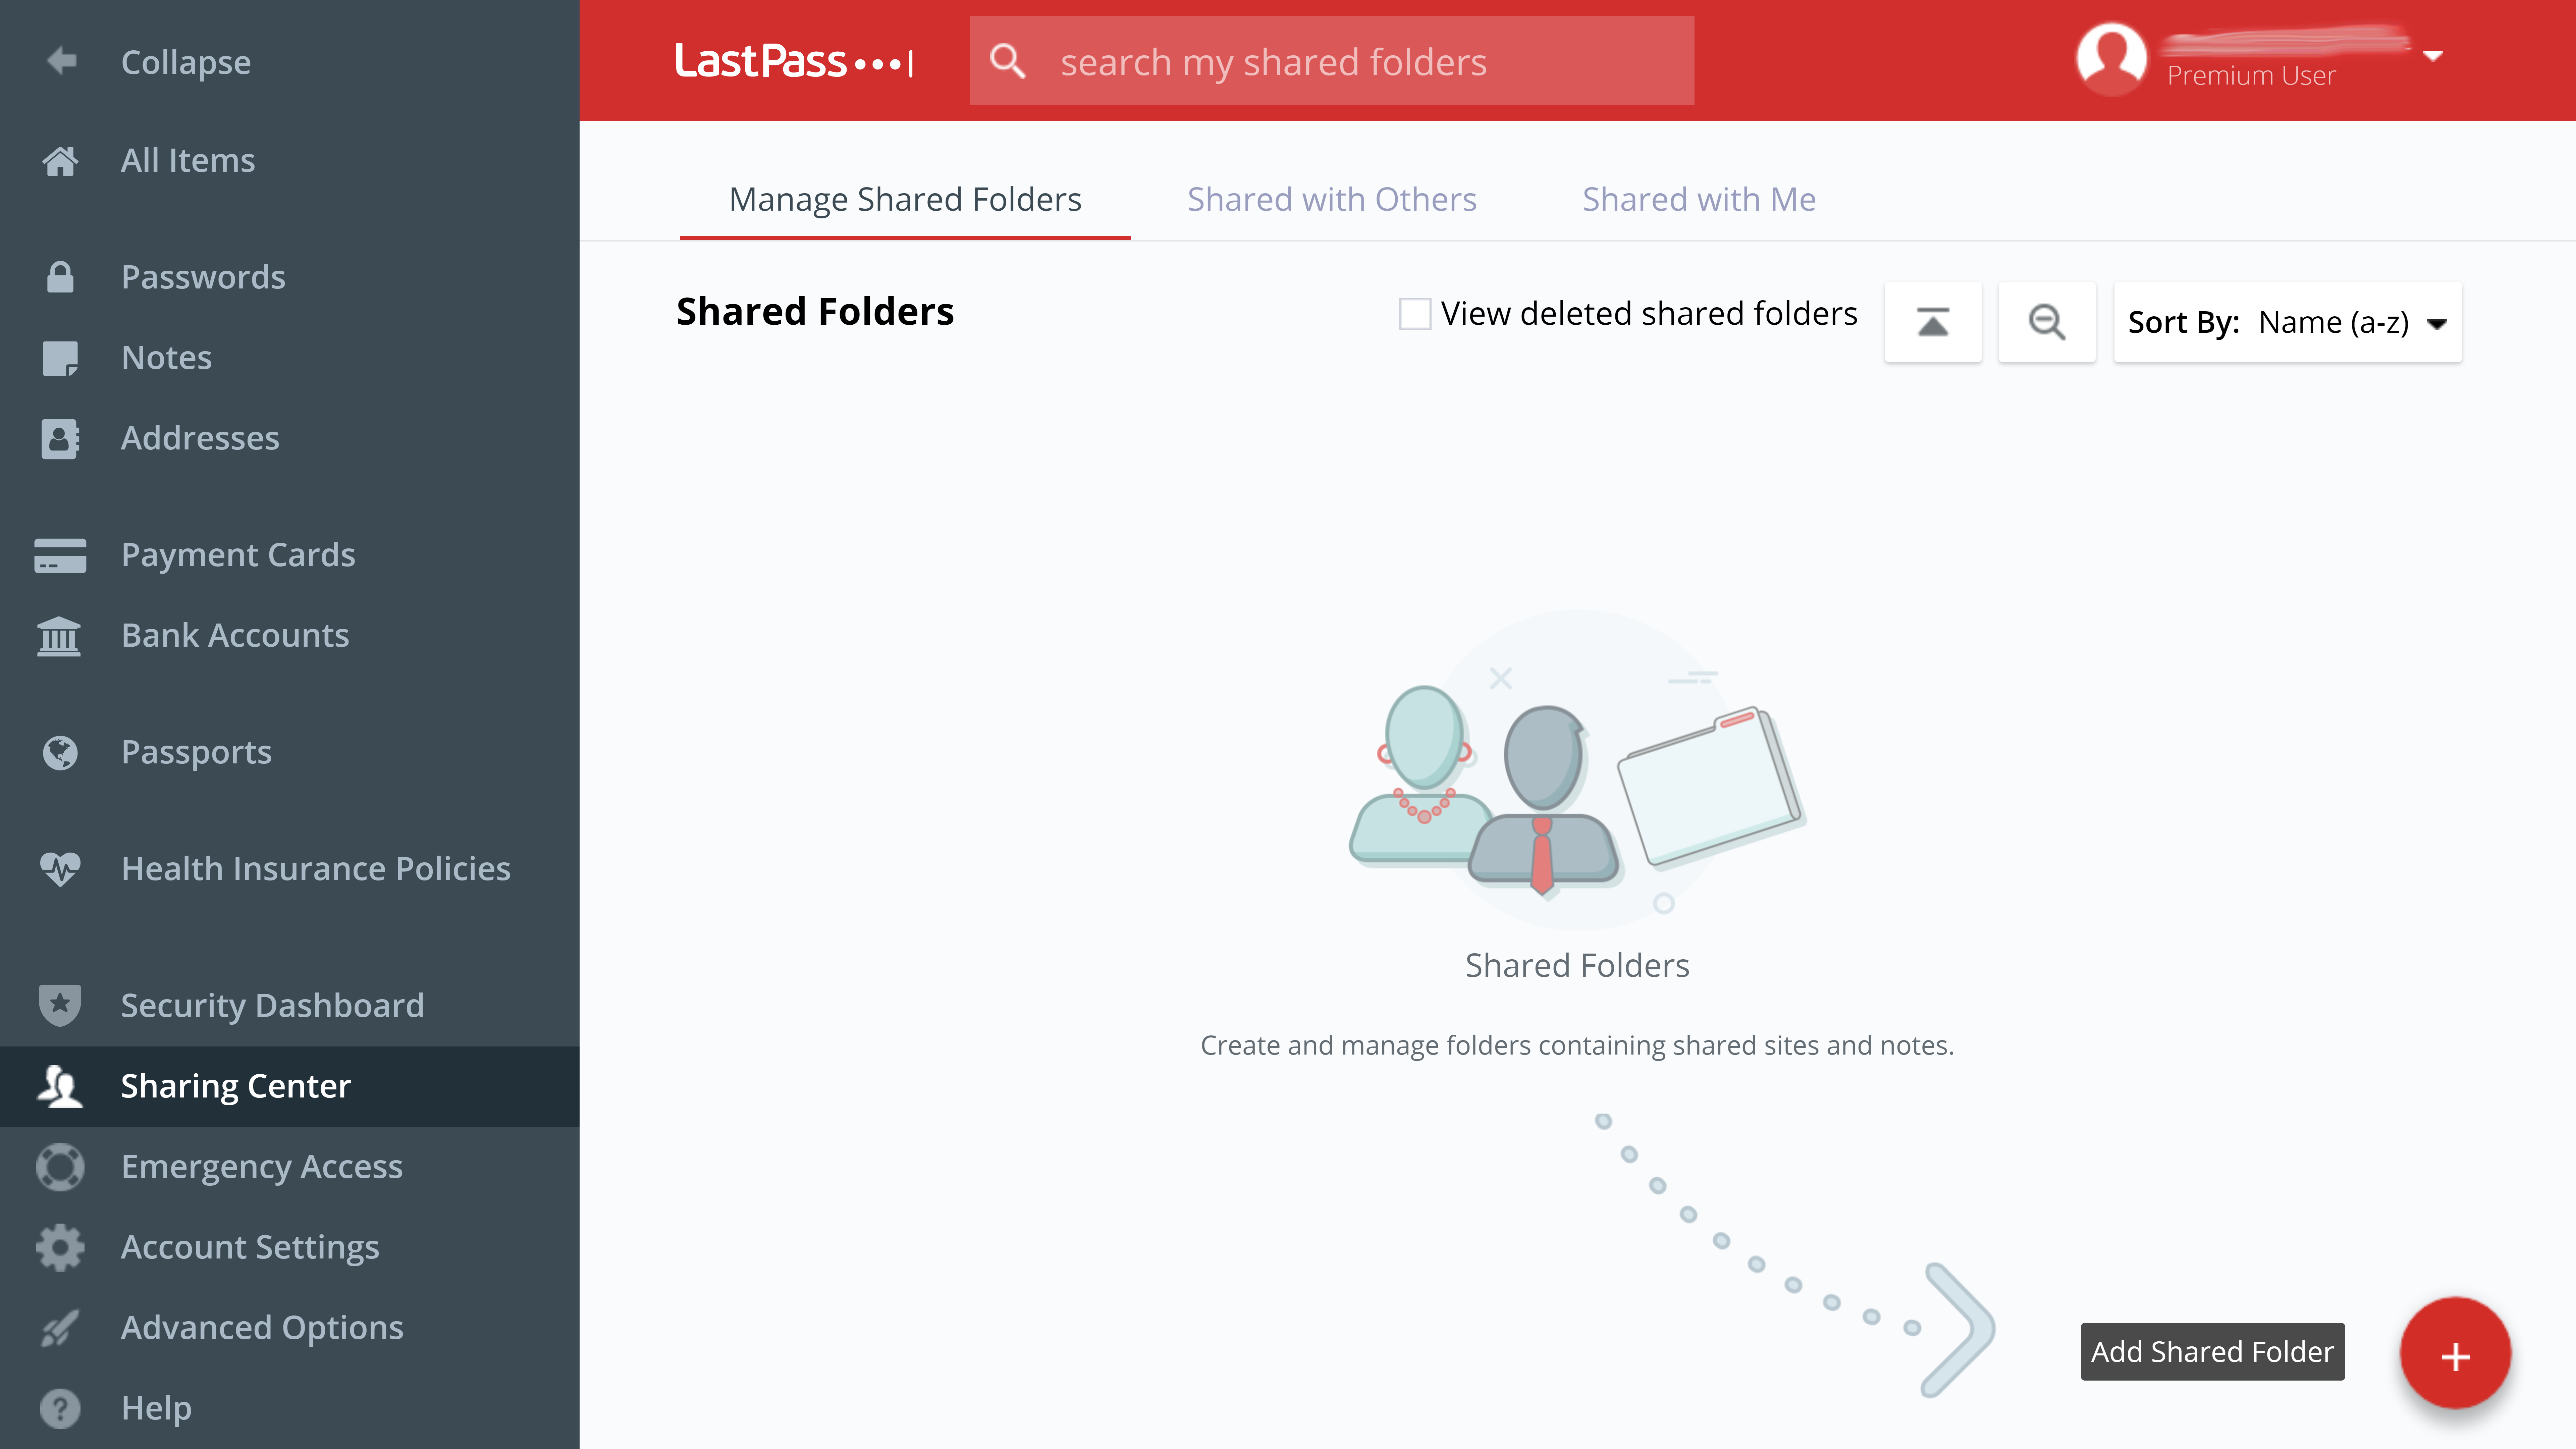 lastpass support page